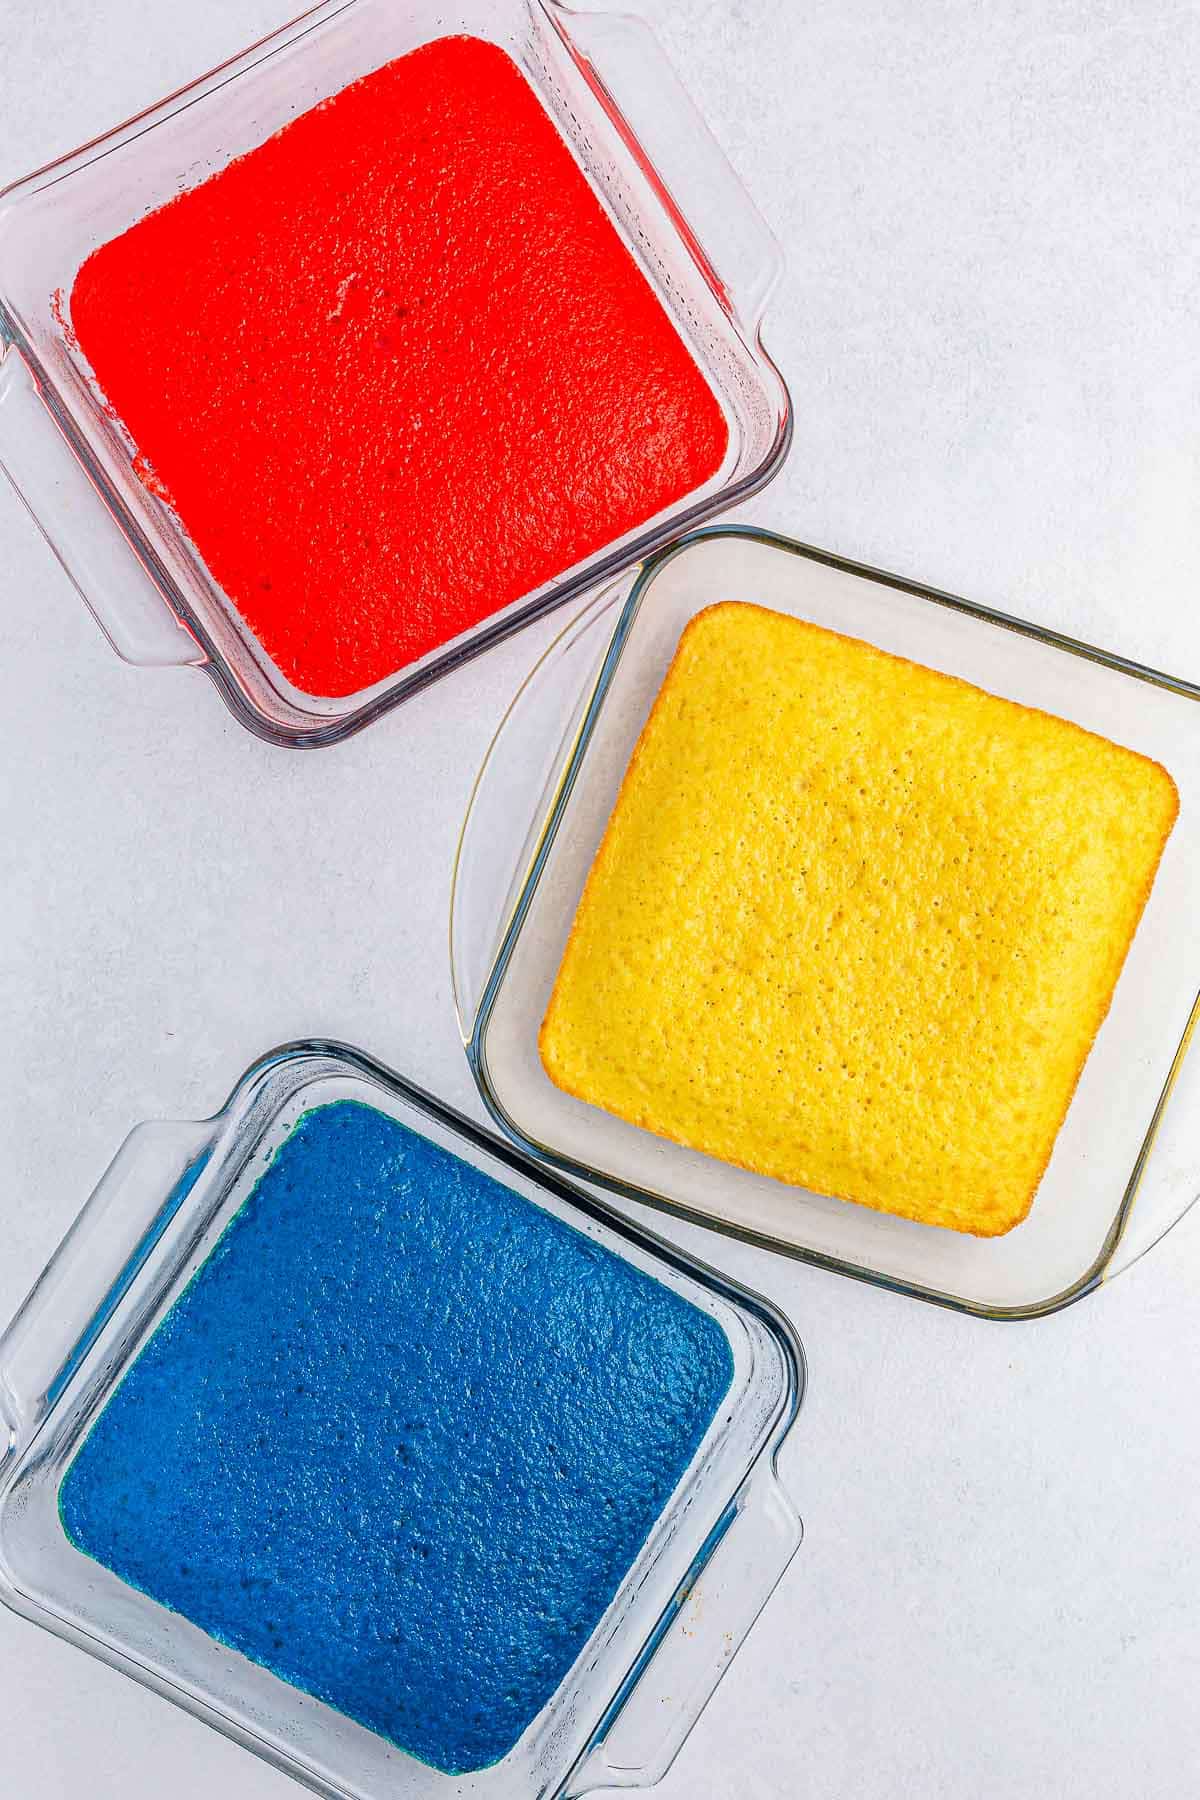 three square glass baking dishes. one blue, one red and one white.